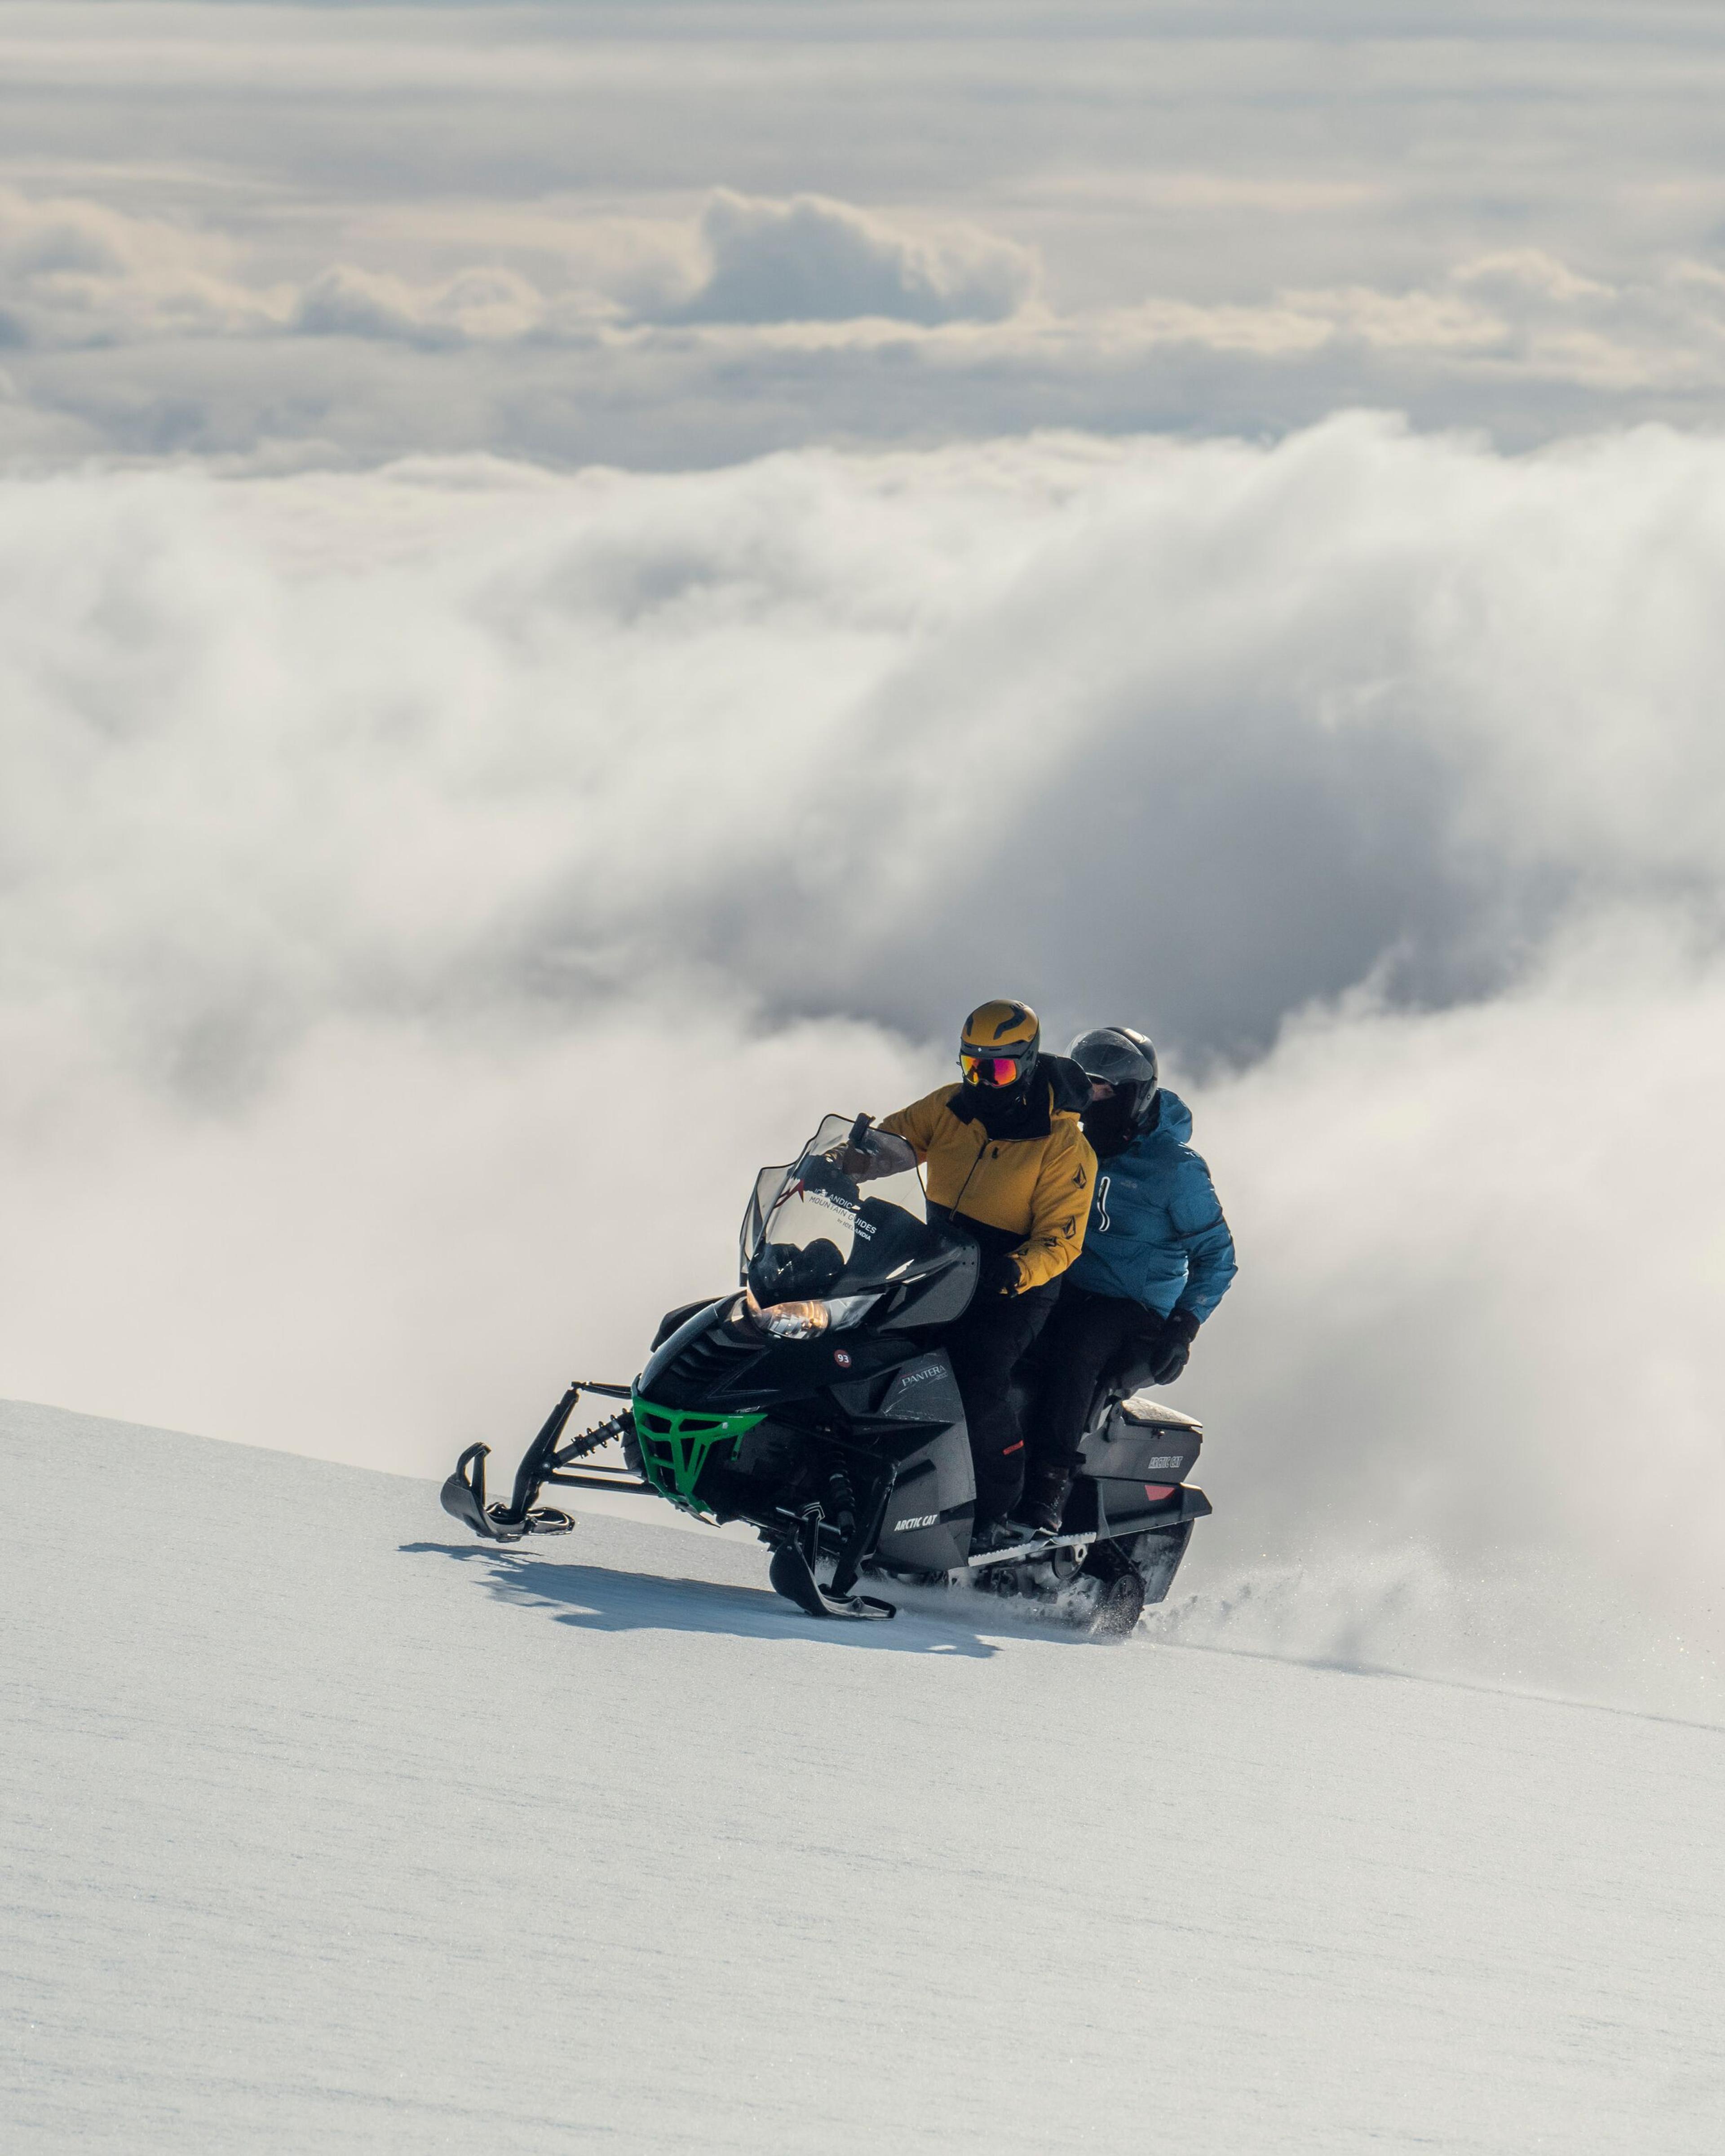 Two people riding a snowmobile on a glecier in Iceland.